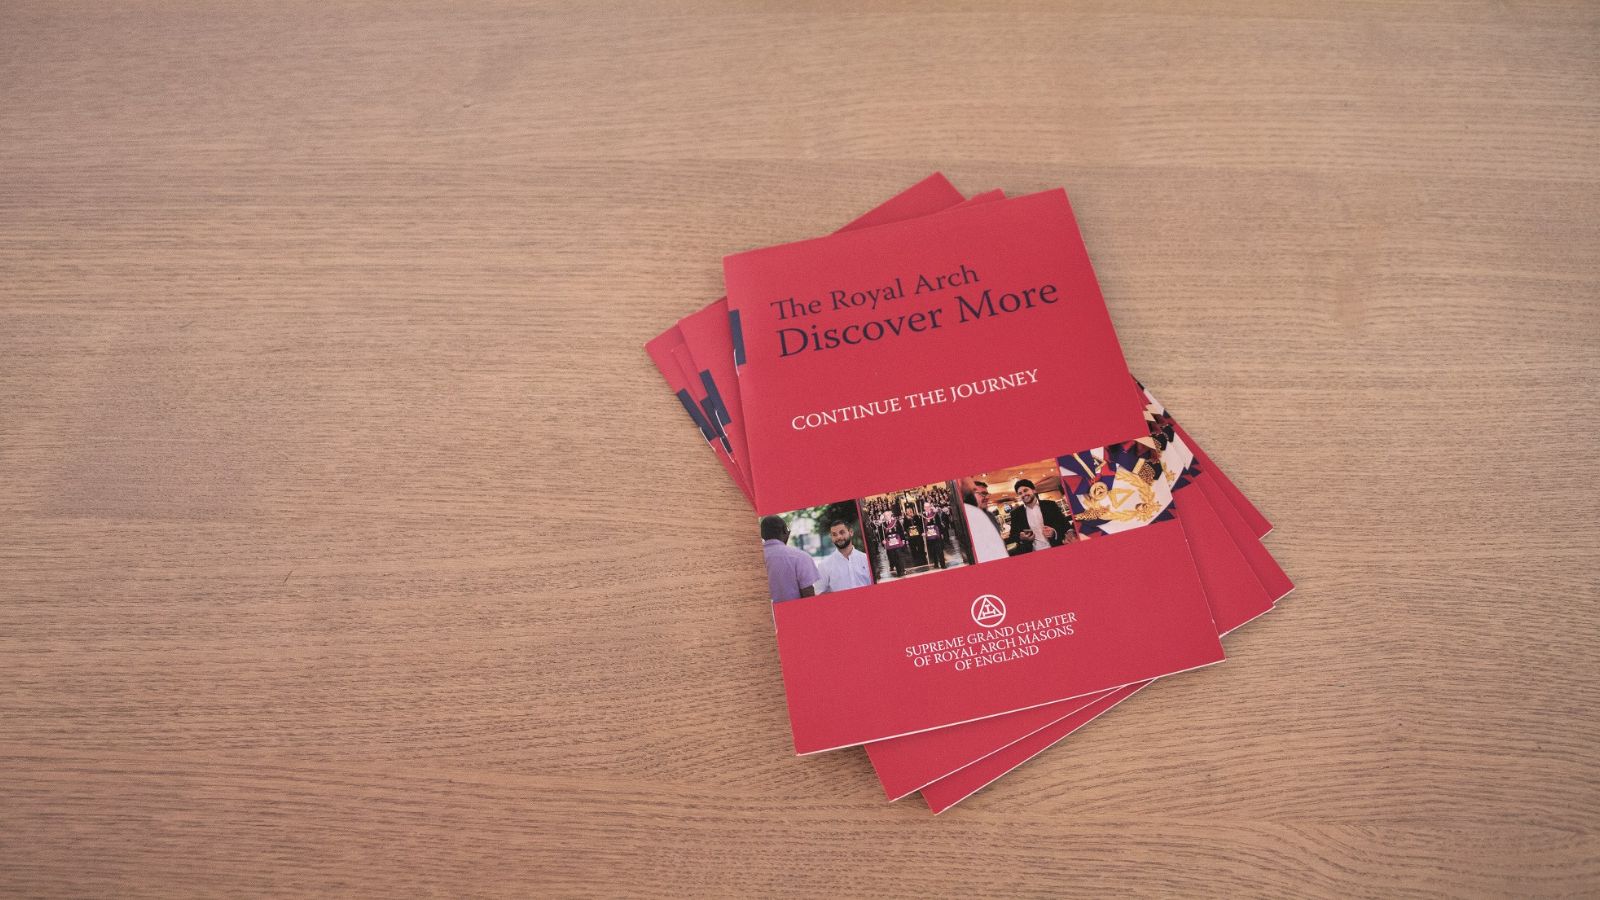 Red booklets titled 'The Royal Arch - Discover More'